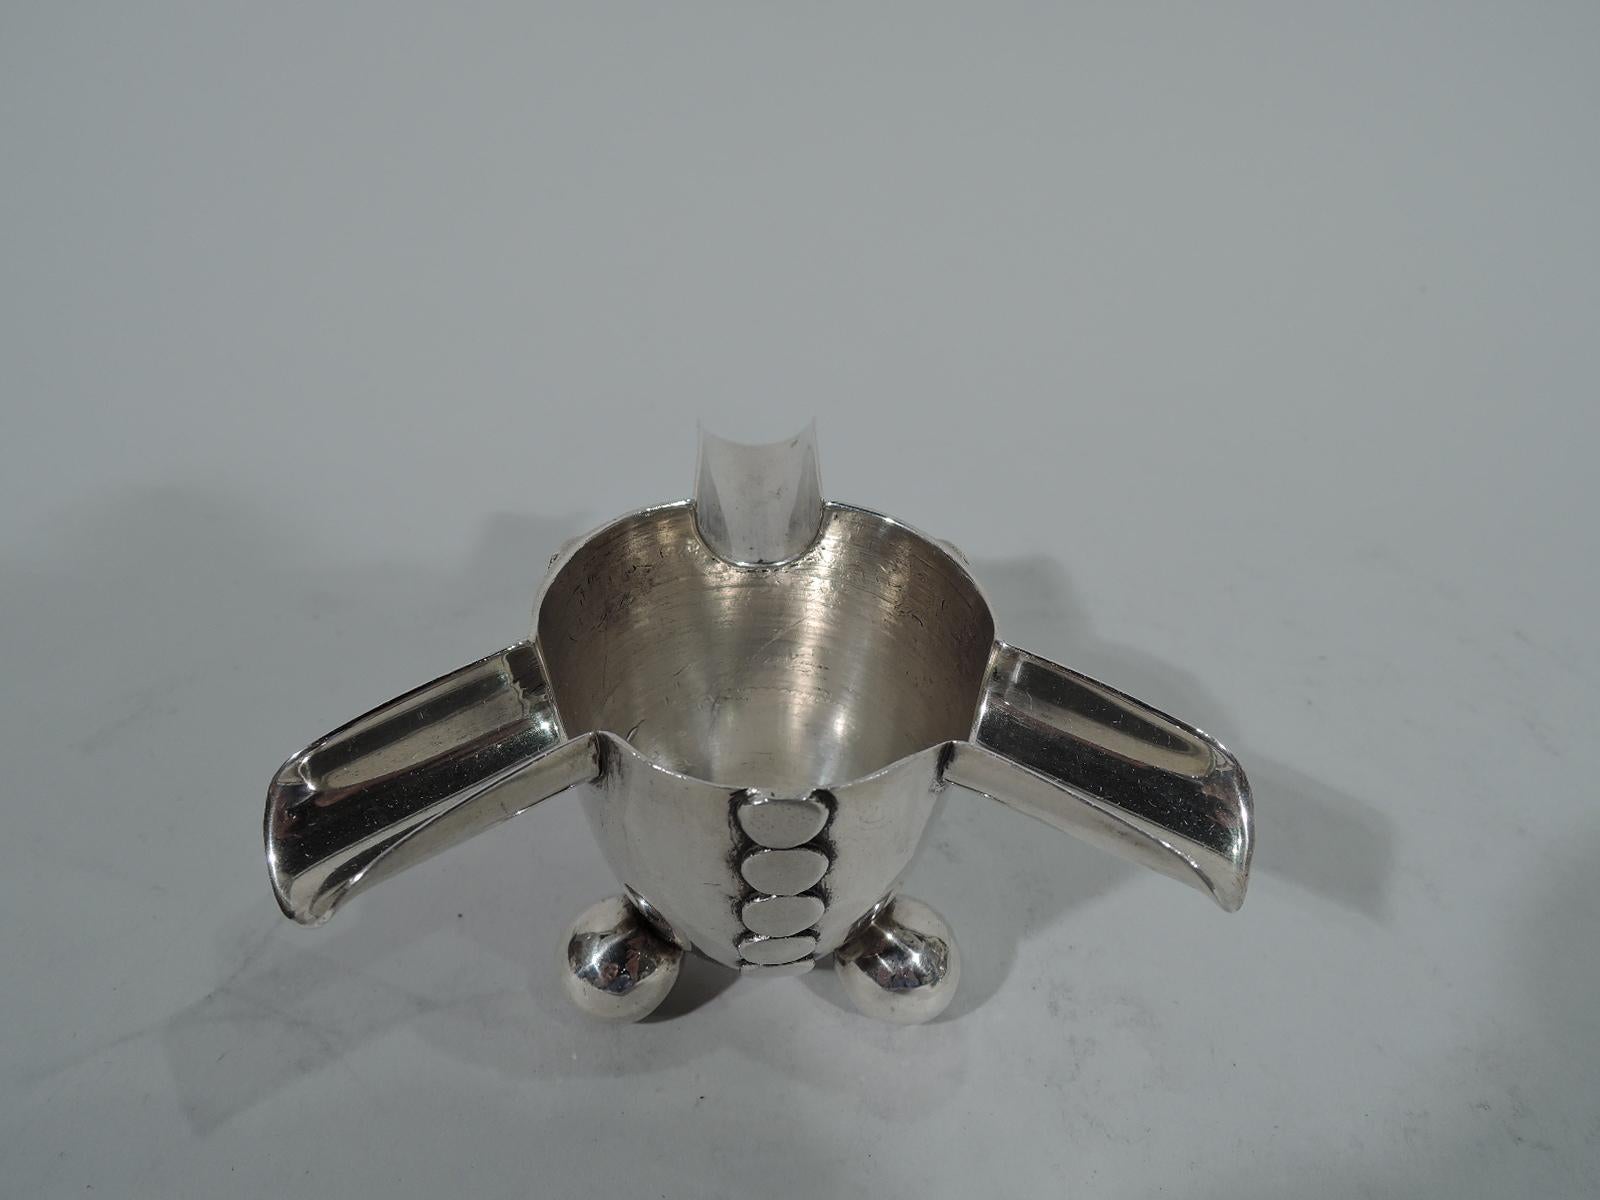 Mid-Century Modern sterling silver ashtray. Made by Spratling in Taxco, Mexico. Urn with 3 horizontal cradles and 3 ball supports. Three rows of circles applied vertically to exterior. A funny, anthropomorphic design, suggestive of a headless human,